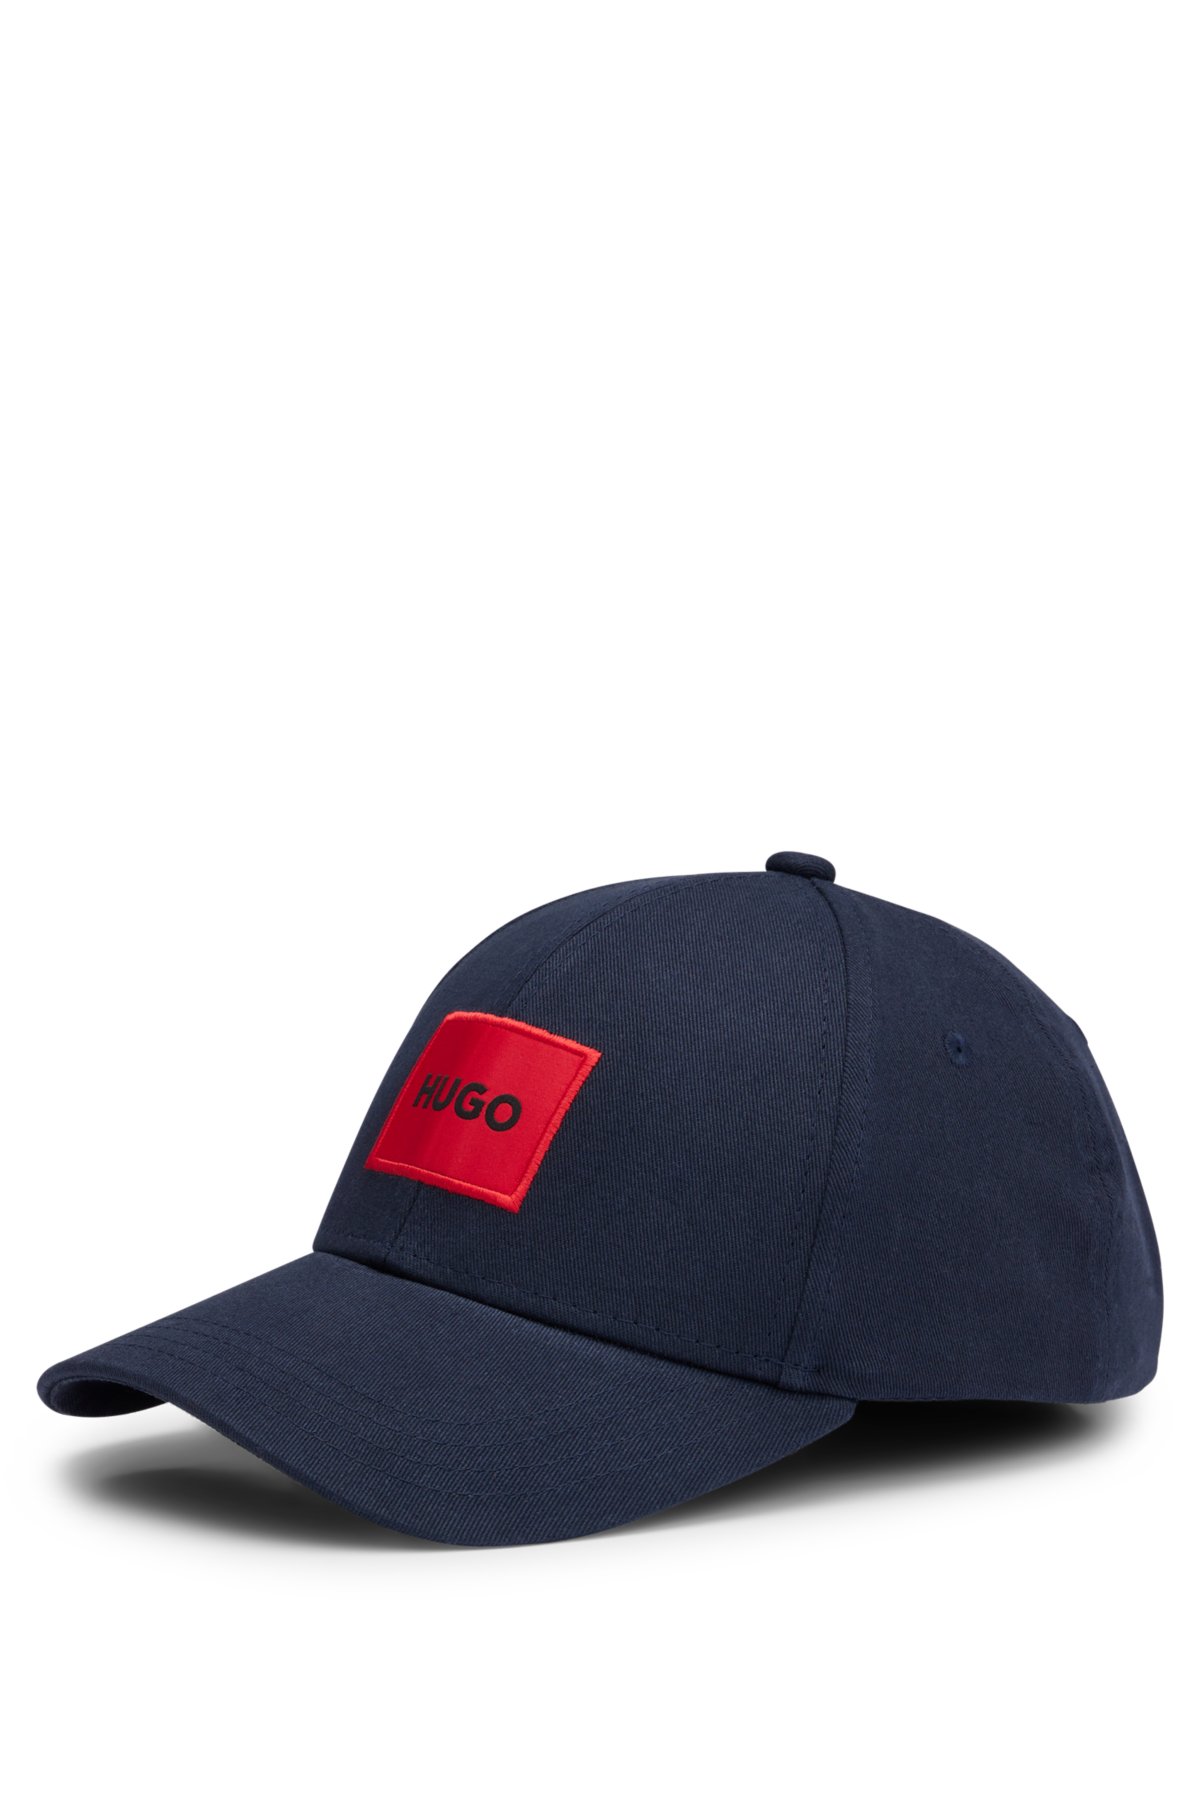 Cotton-twill red label logo cap - HUGO with